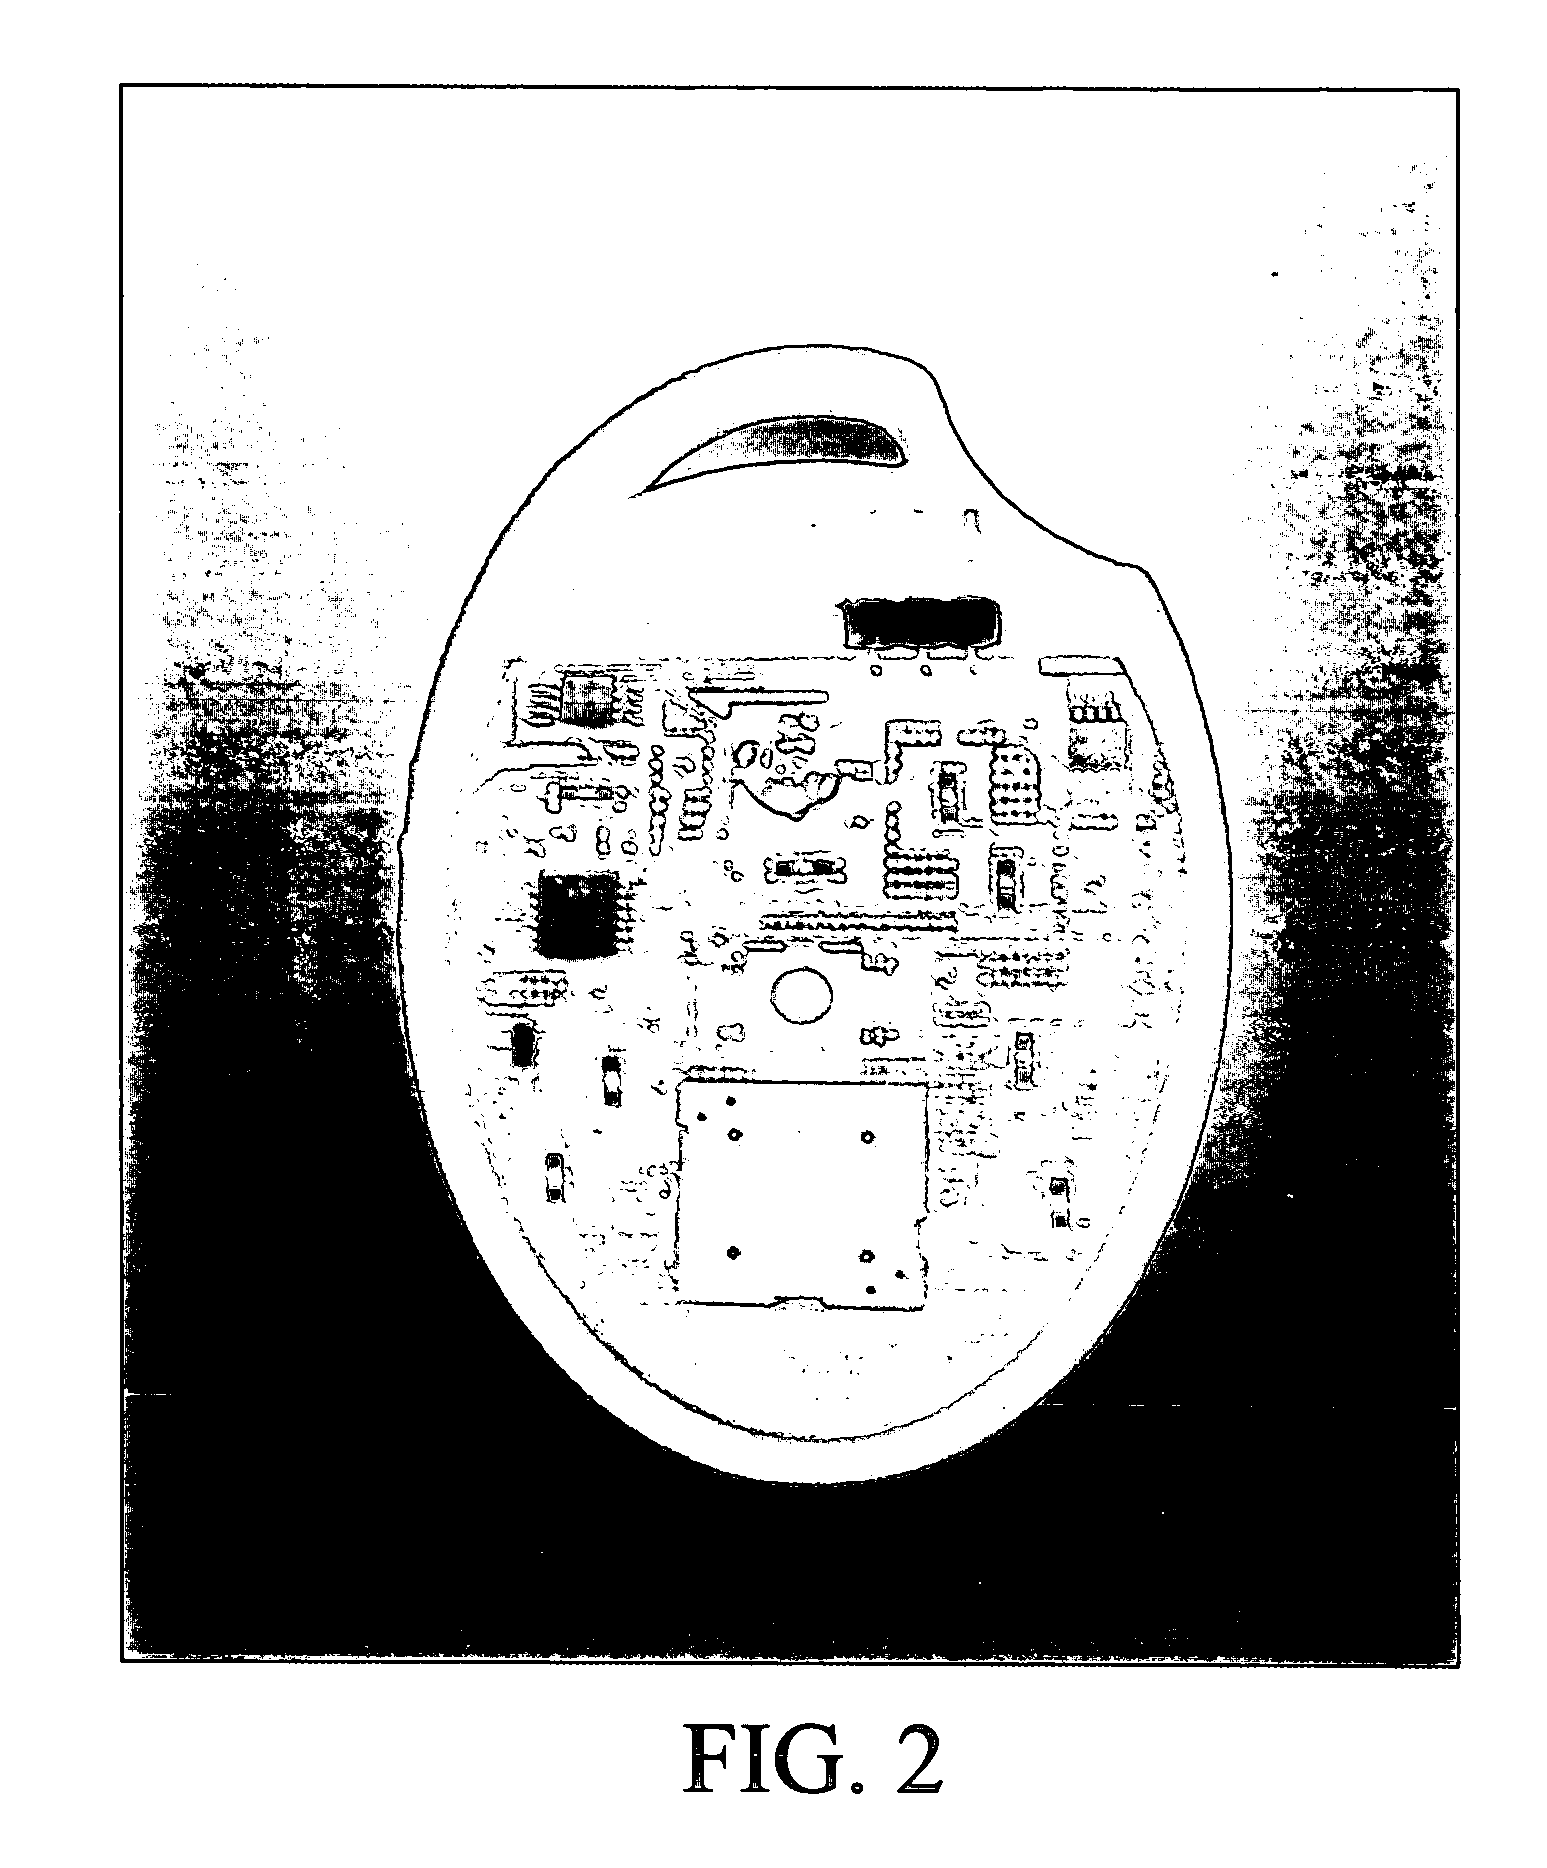 Method and apparatus for ferrous object and/or magnetic field detection for MRI safety